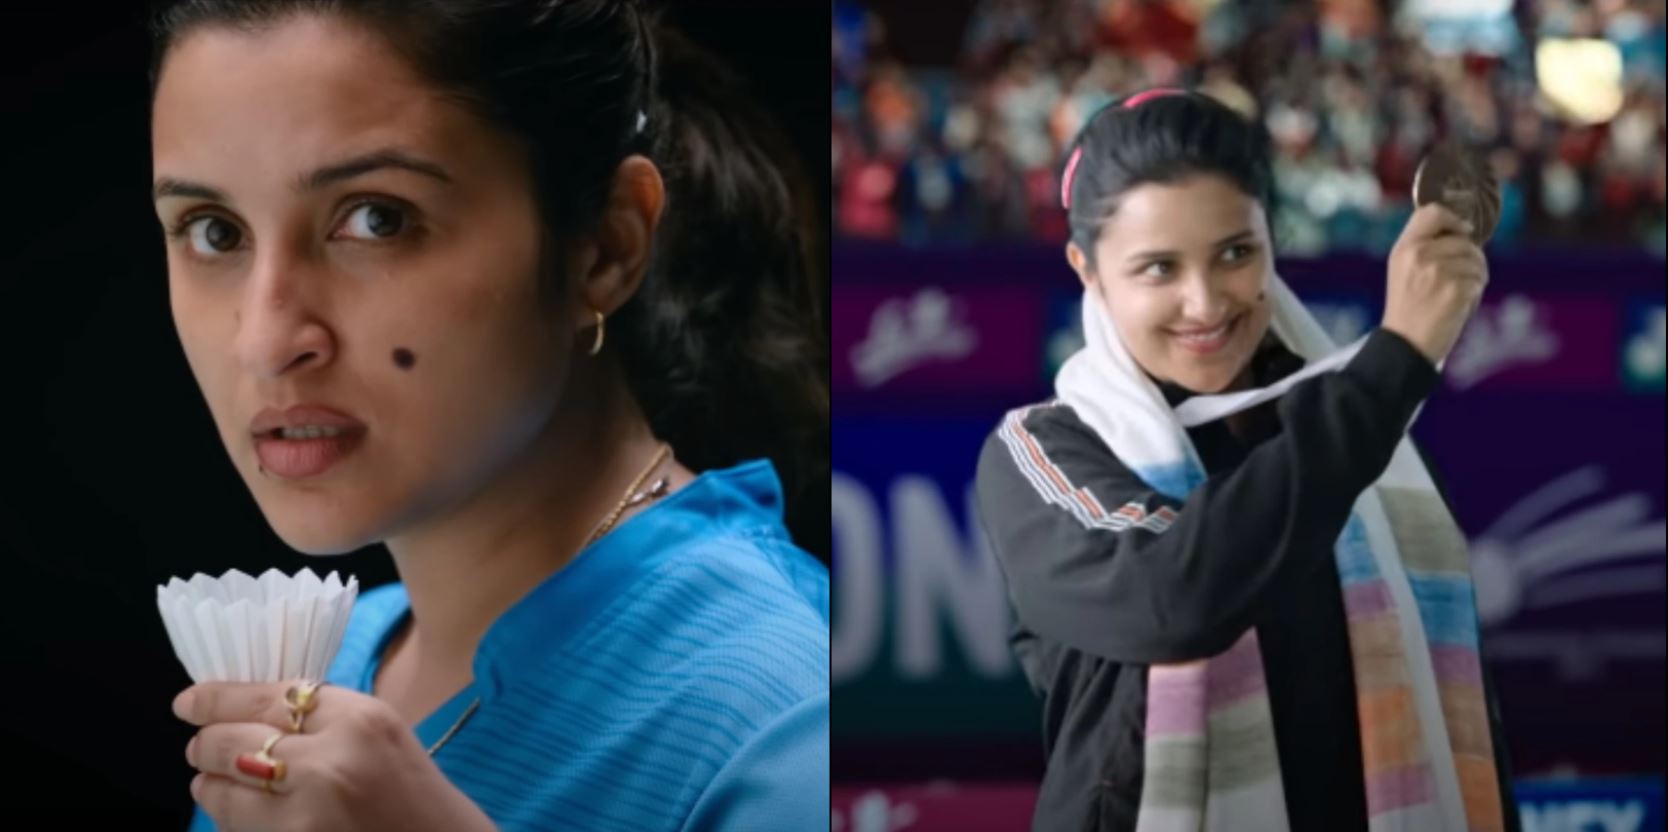 Saina Trailer: Parineeti Chopra Double As The Ace Badminton Player, Shows Her Grit And Determination To Never Give Up; Watch